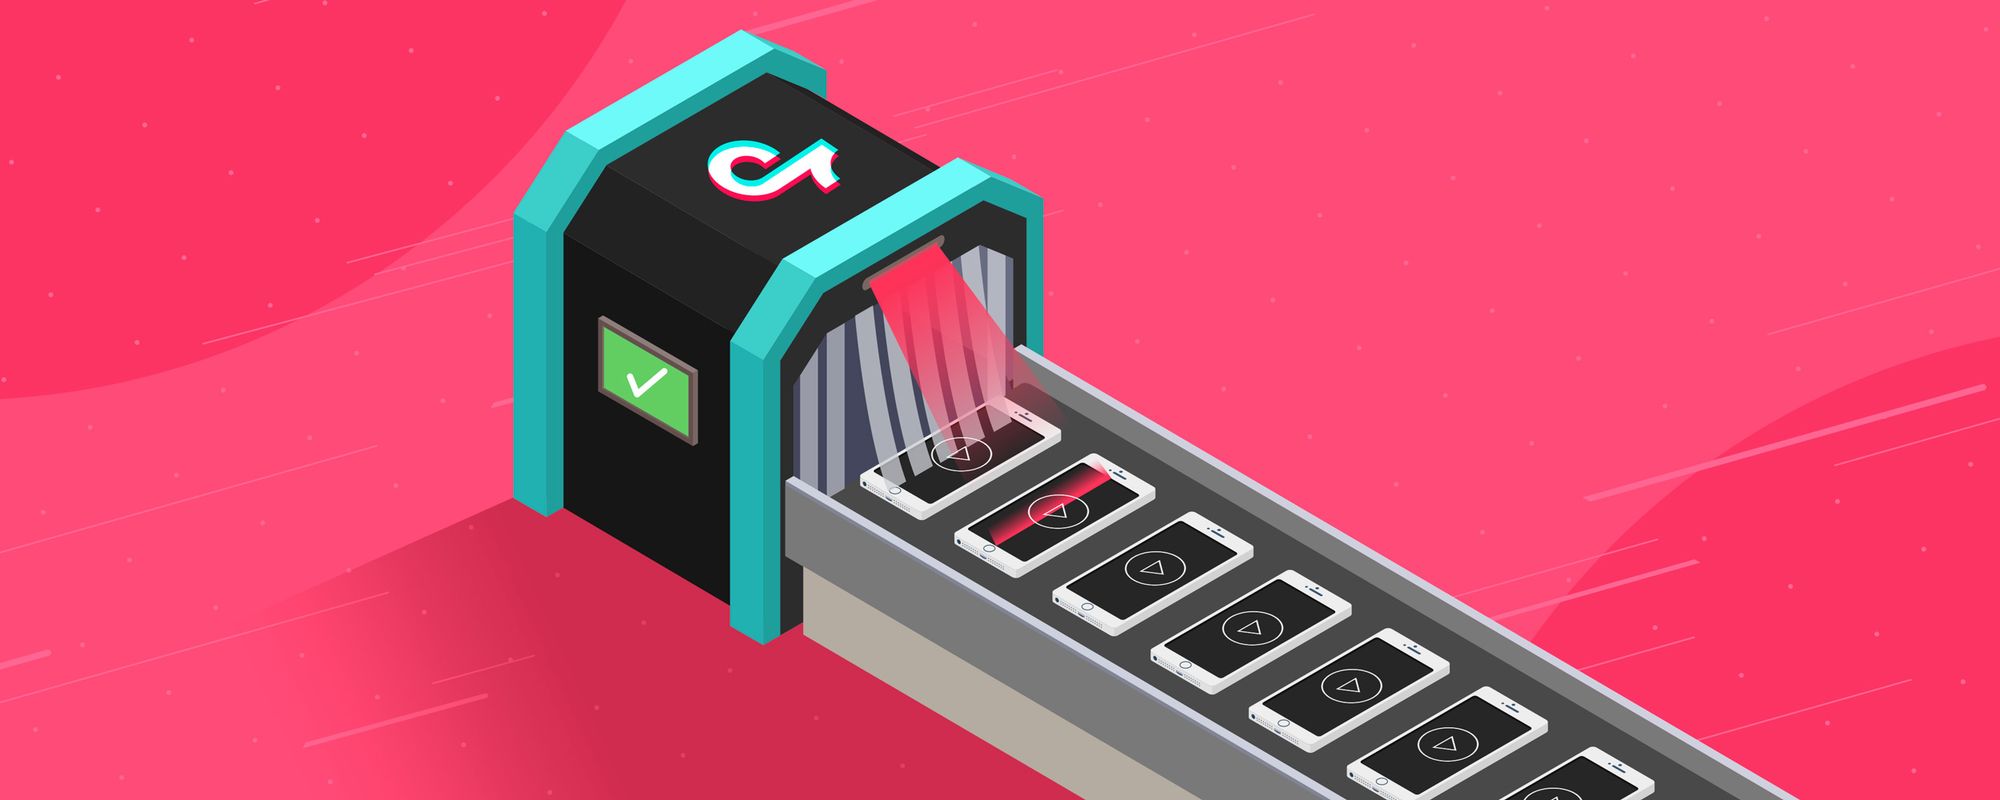 Illustration of a machine representing TikTok scanning phones for copyrighted content.